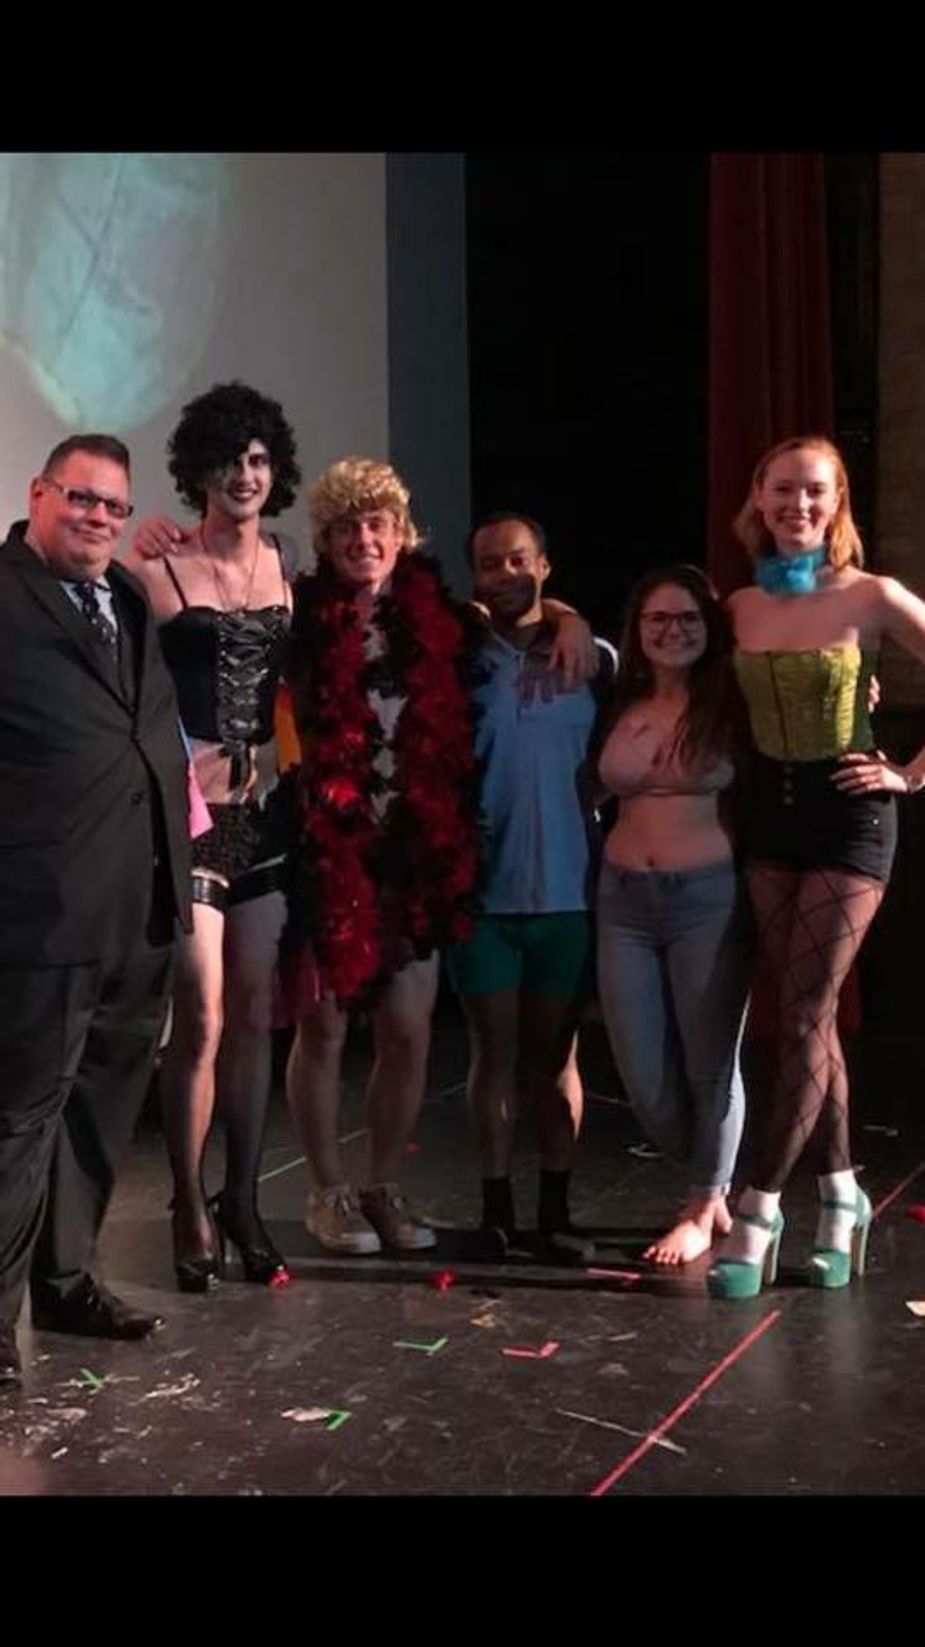 It wouldn't be Halloween without Sooner Theatre's screening of "Rocky Horror Picture Show." Photo by Ruckus Entertainment.